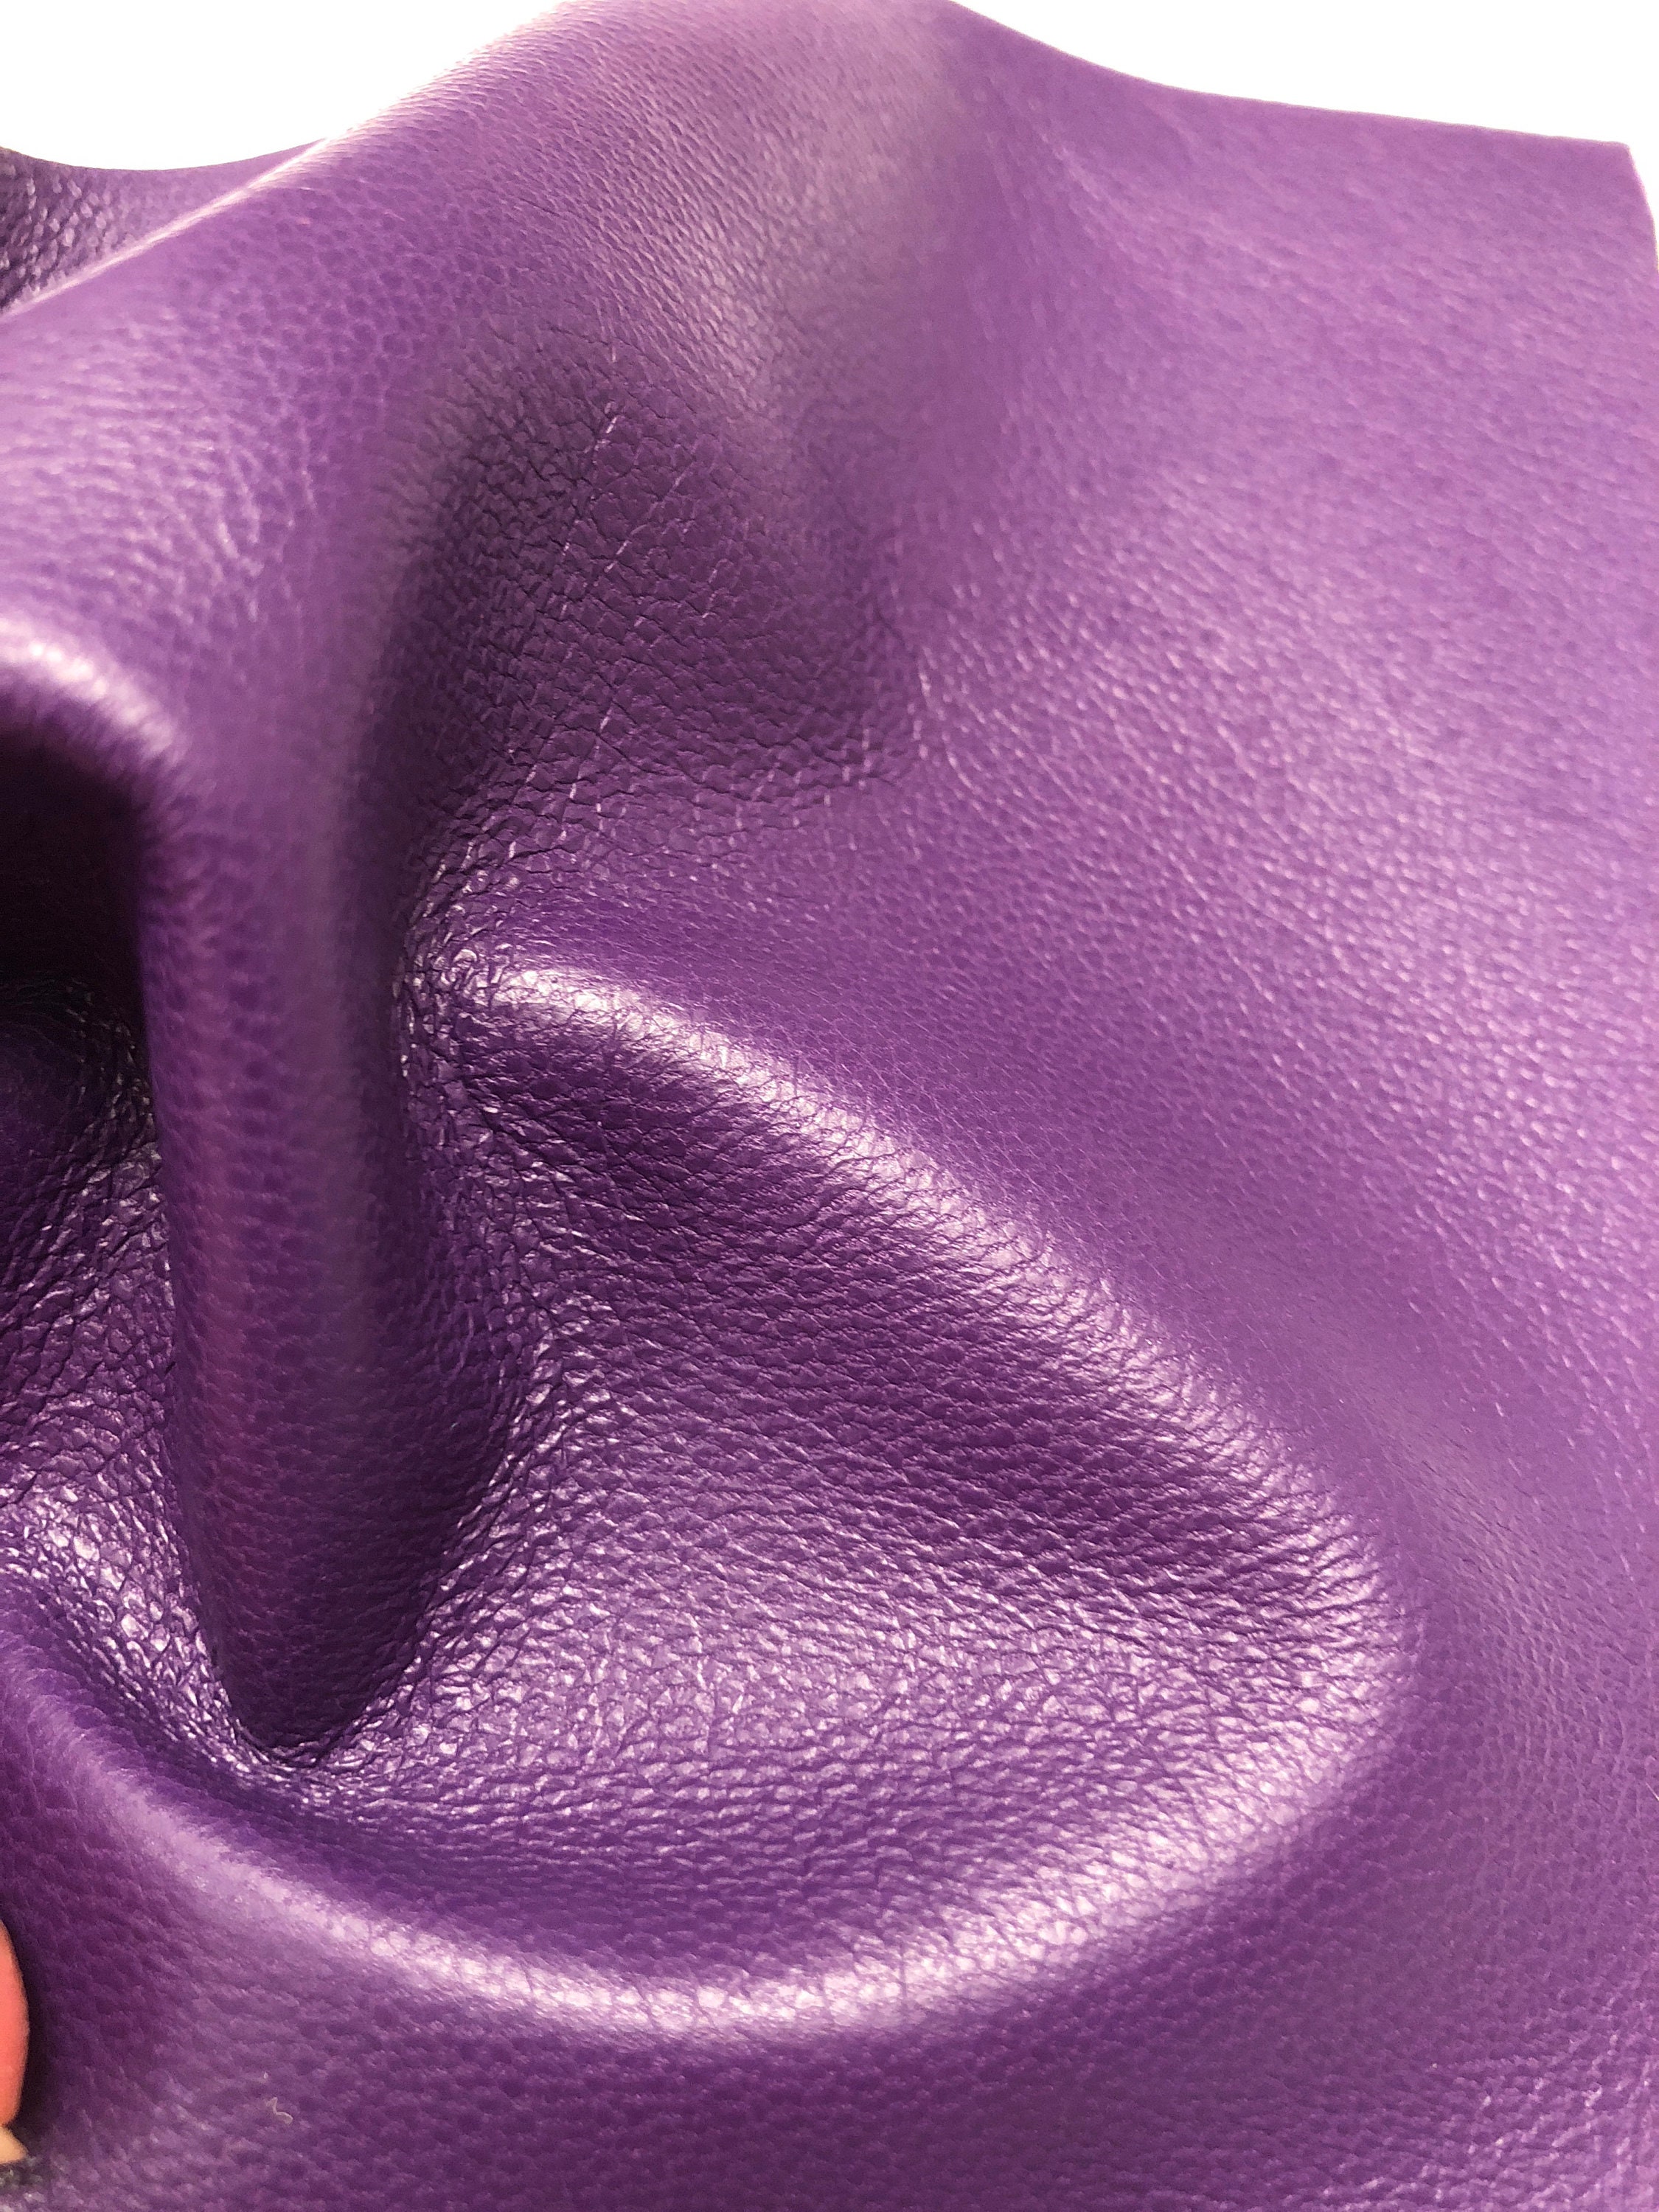 PURPLE SUPERB LEATHER Choose your size top quality leather | Etsy